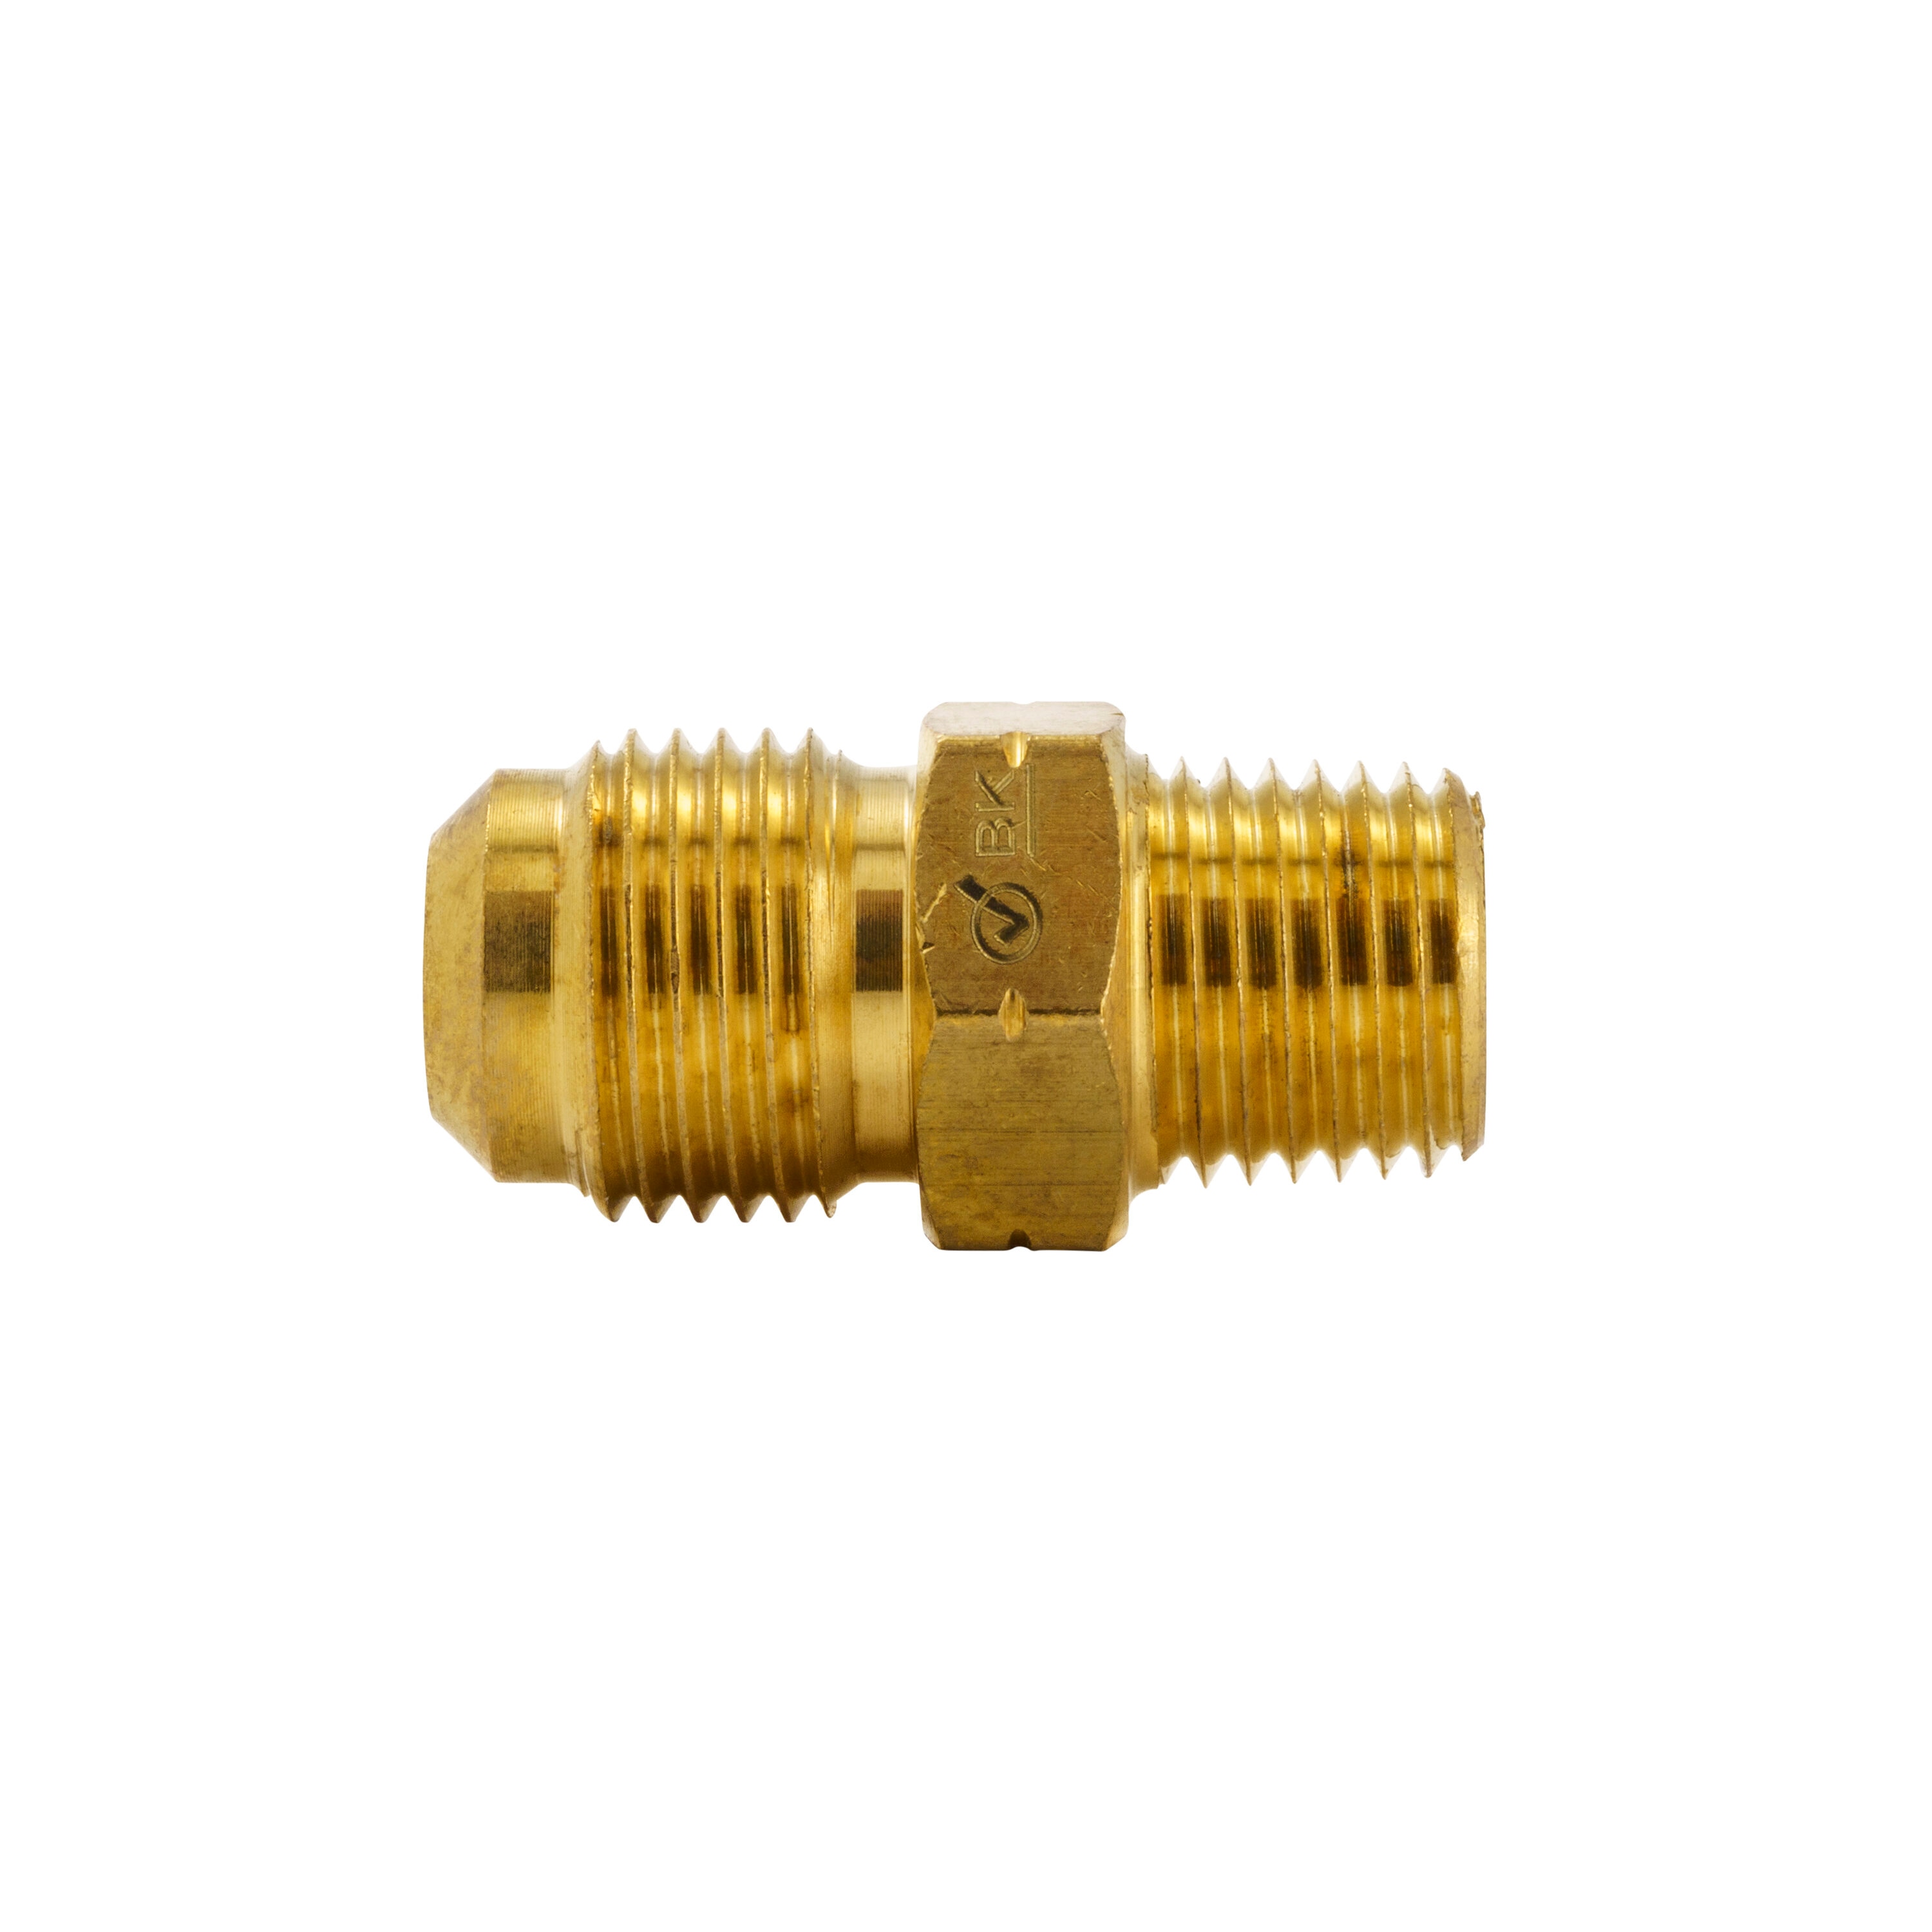 Brass Pipe Fittings: Ball Seat Union (NPSM Thread)